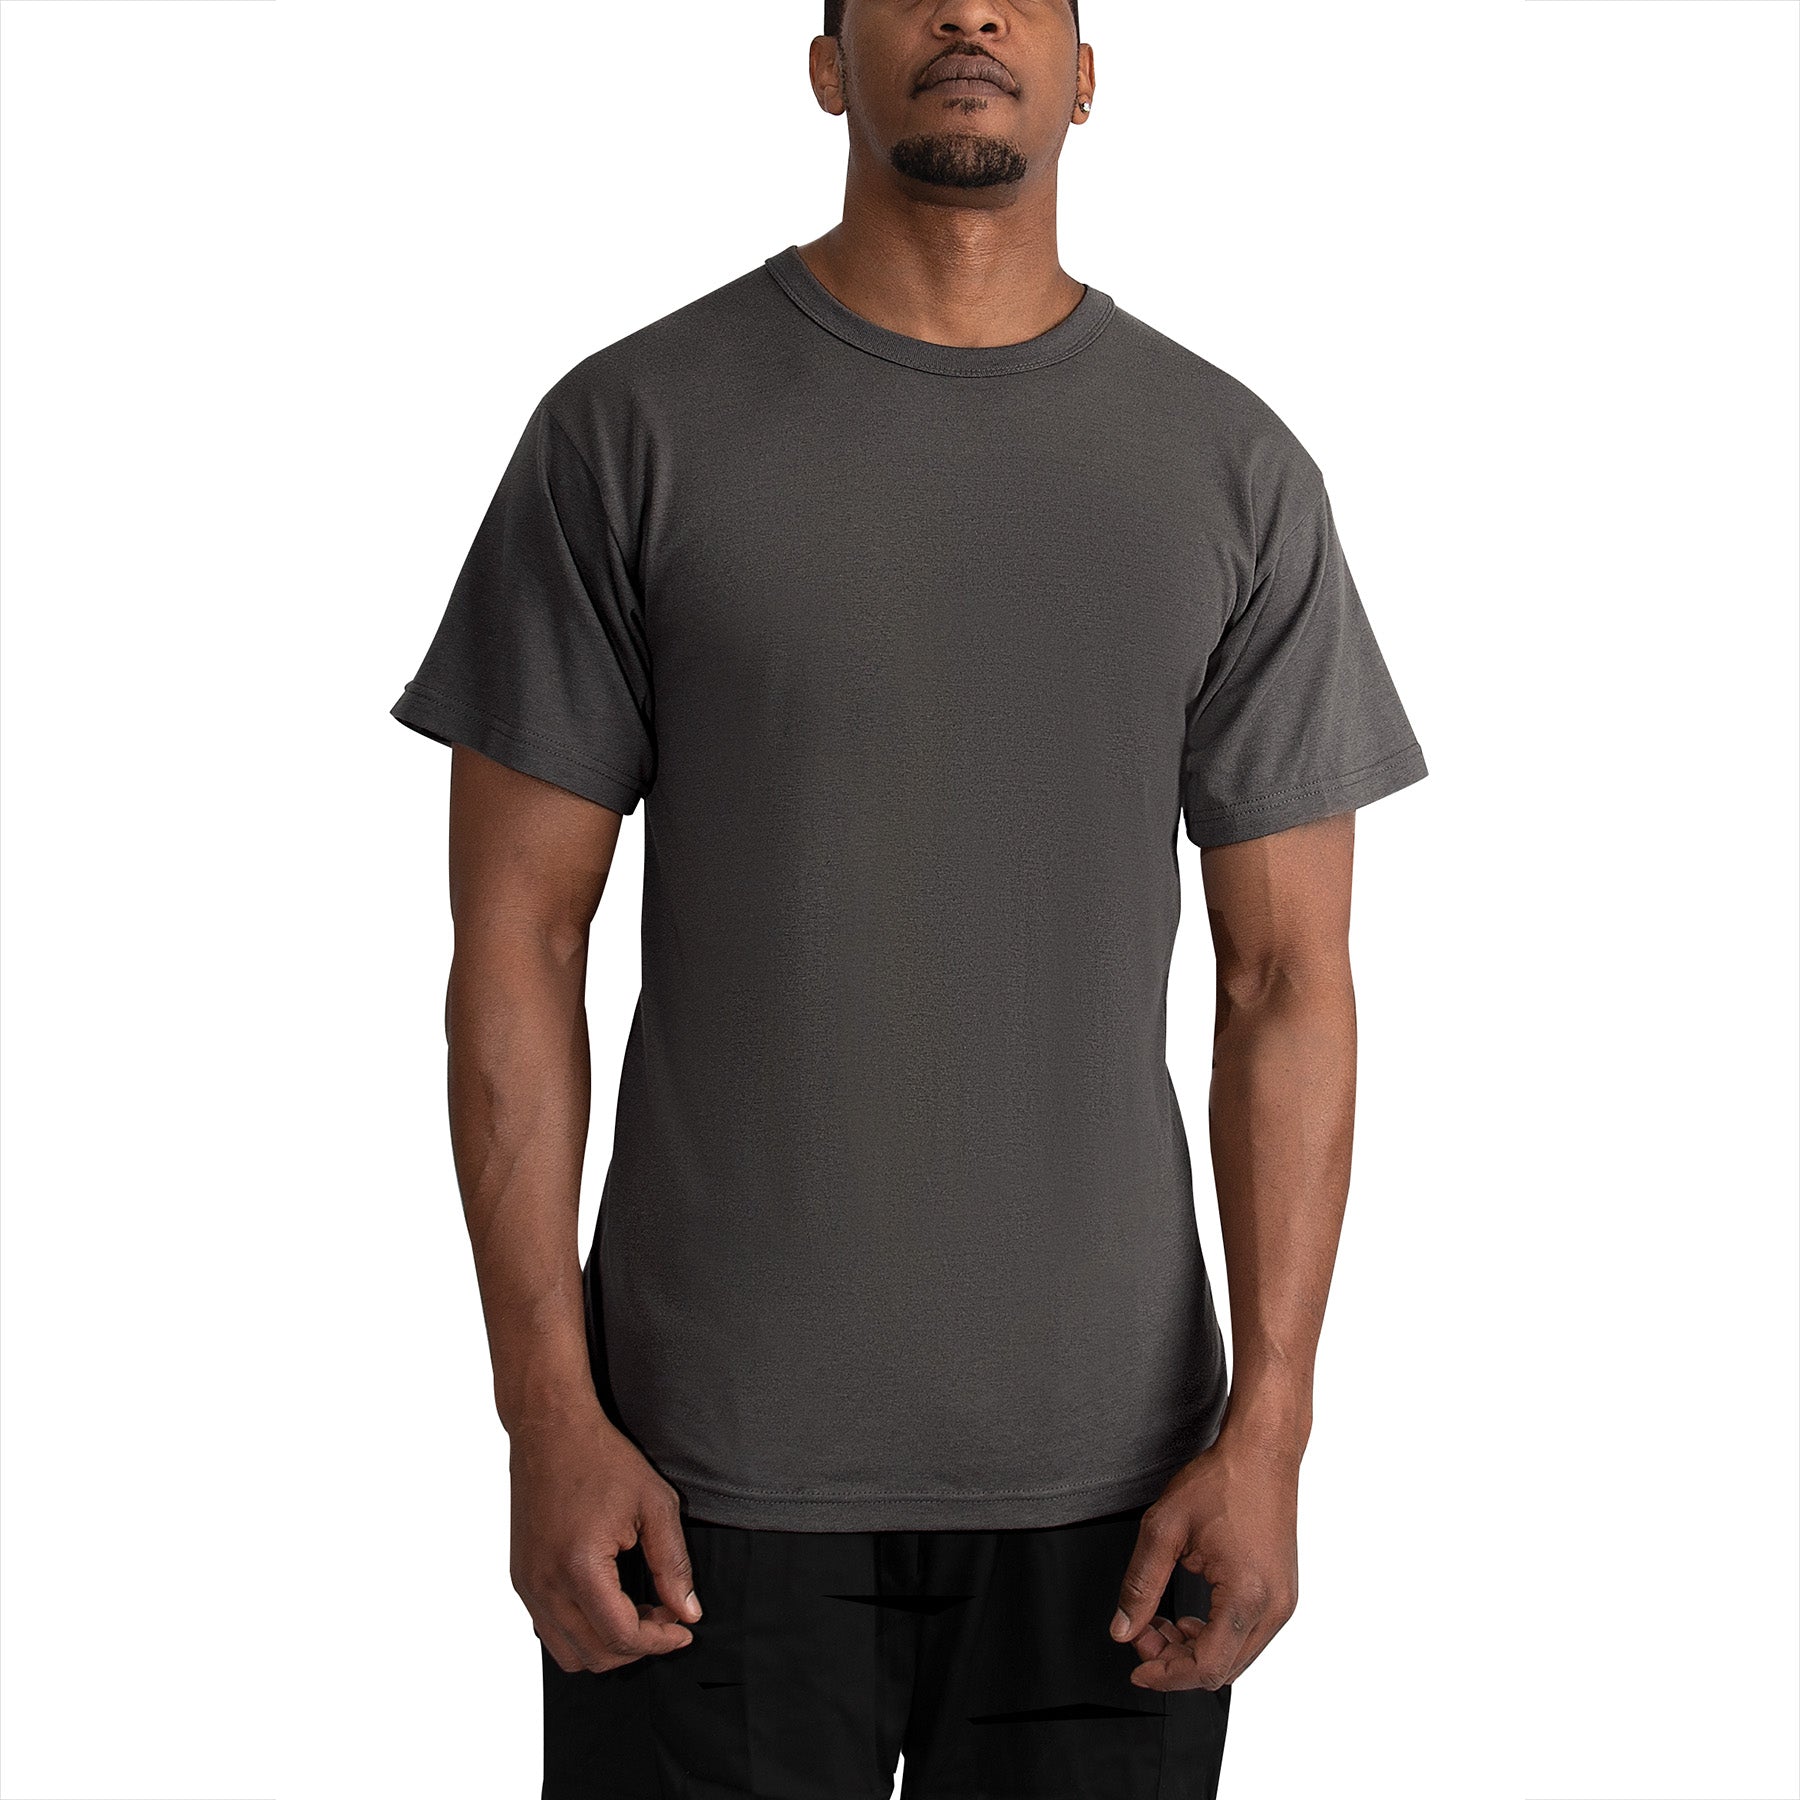 [AR 670-1][Military] Poly/Cotton T-Shirts Charcoal Grey